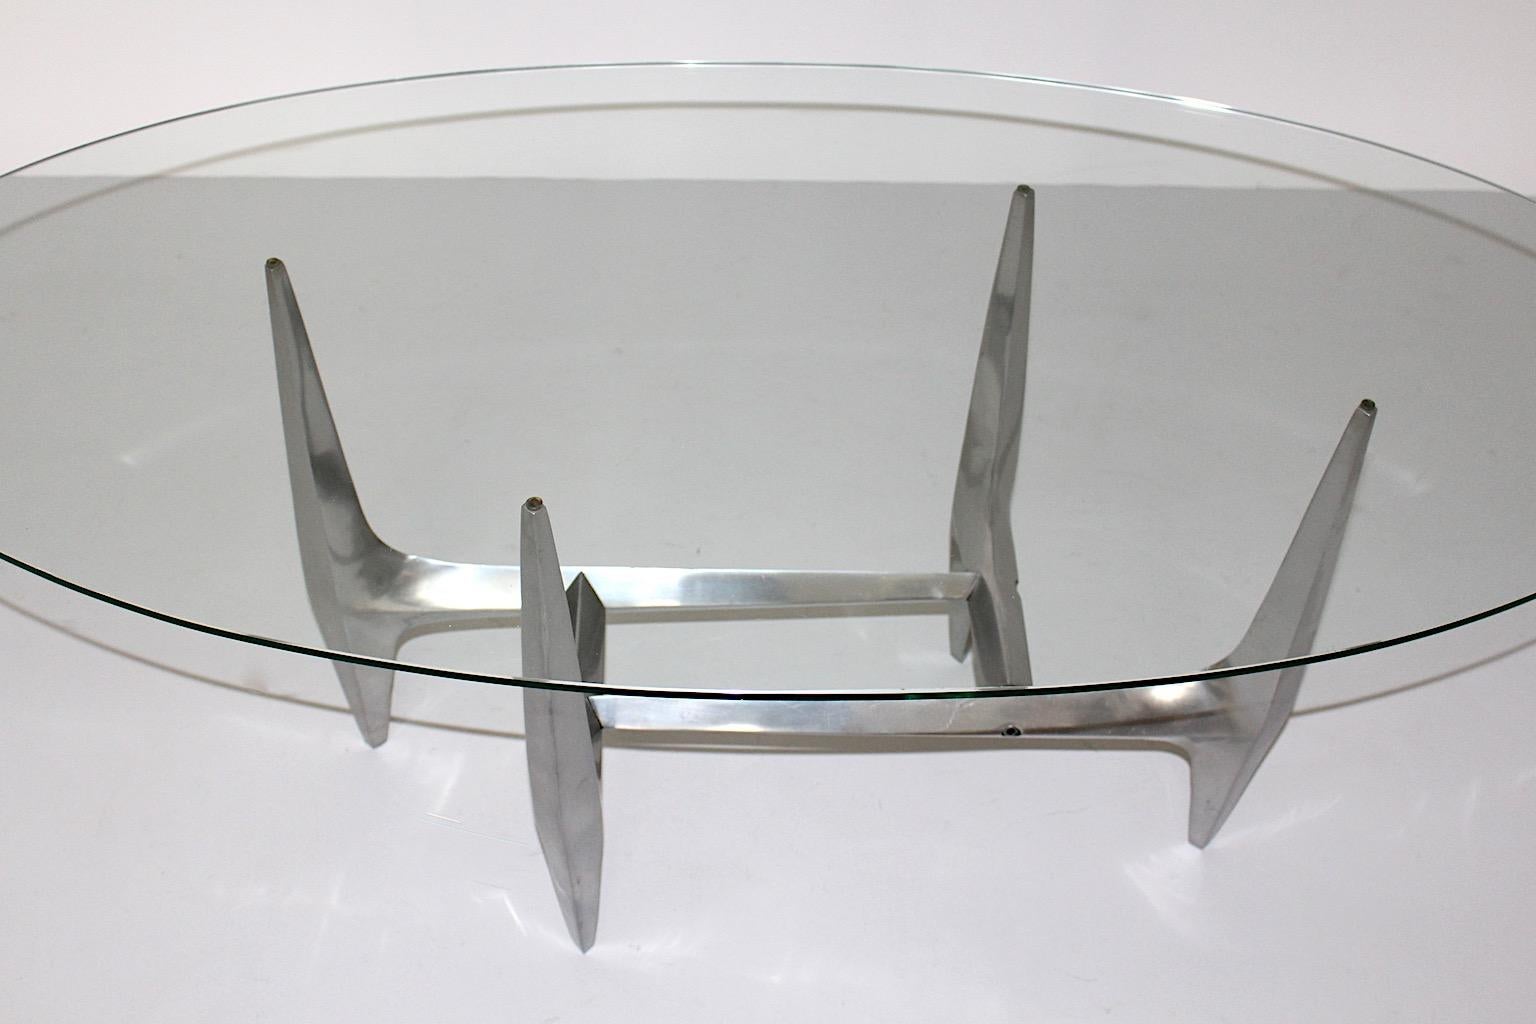 Mid Century Modern sculptural vintage coffee table by Knut Hesterberg 1960s from aluminum and clear glass.
A high-quality vintage coffee table by Knut Hesterberg from polished aluminum base and an oval shaped clear glass top. Produced by Ronald